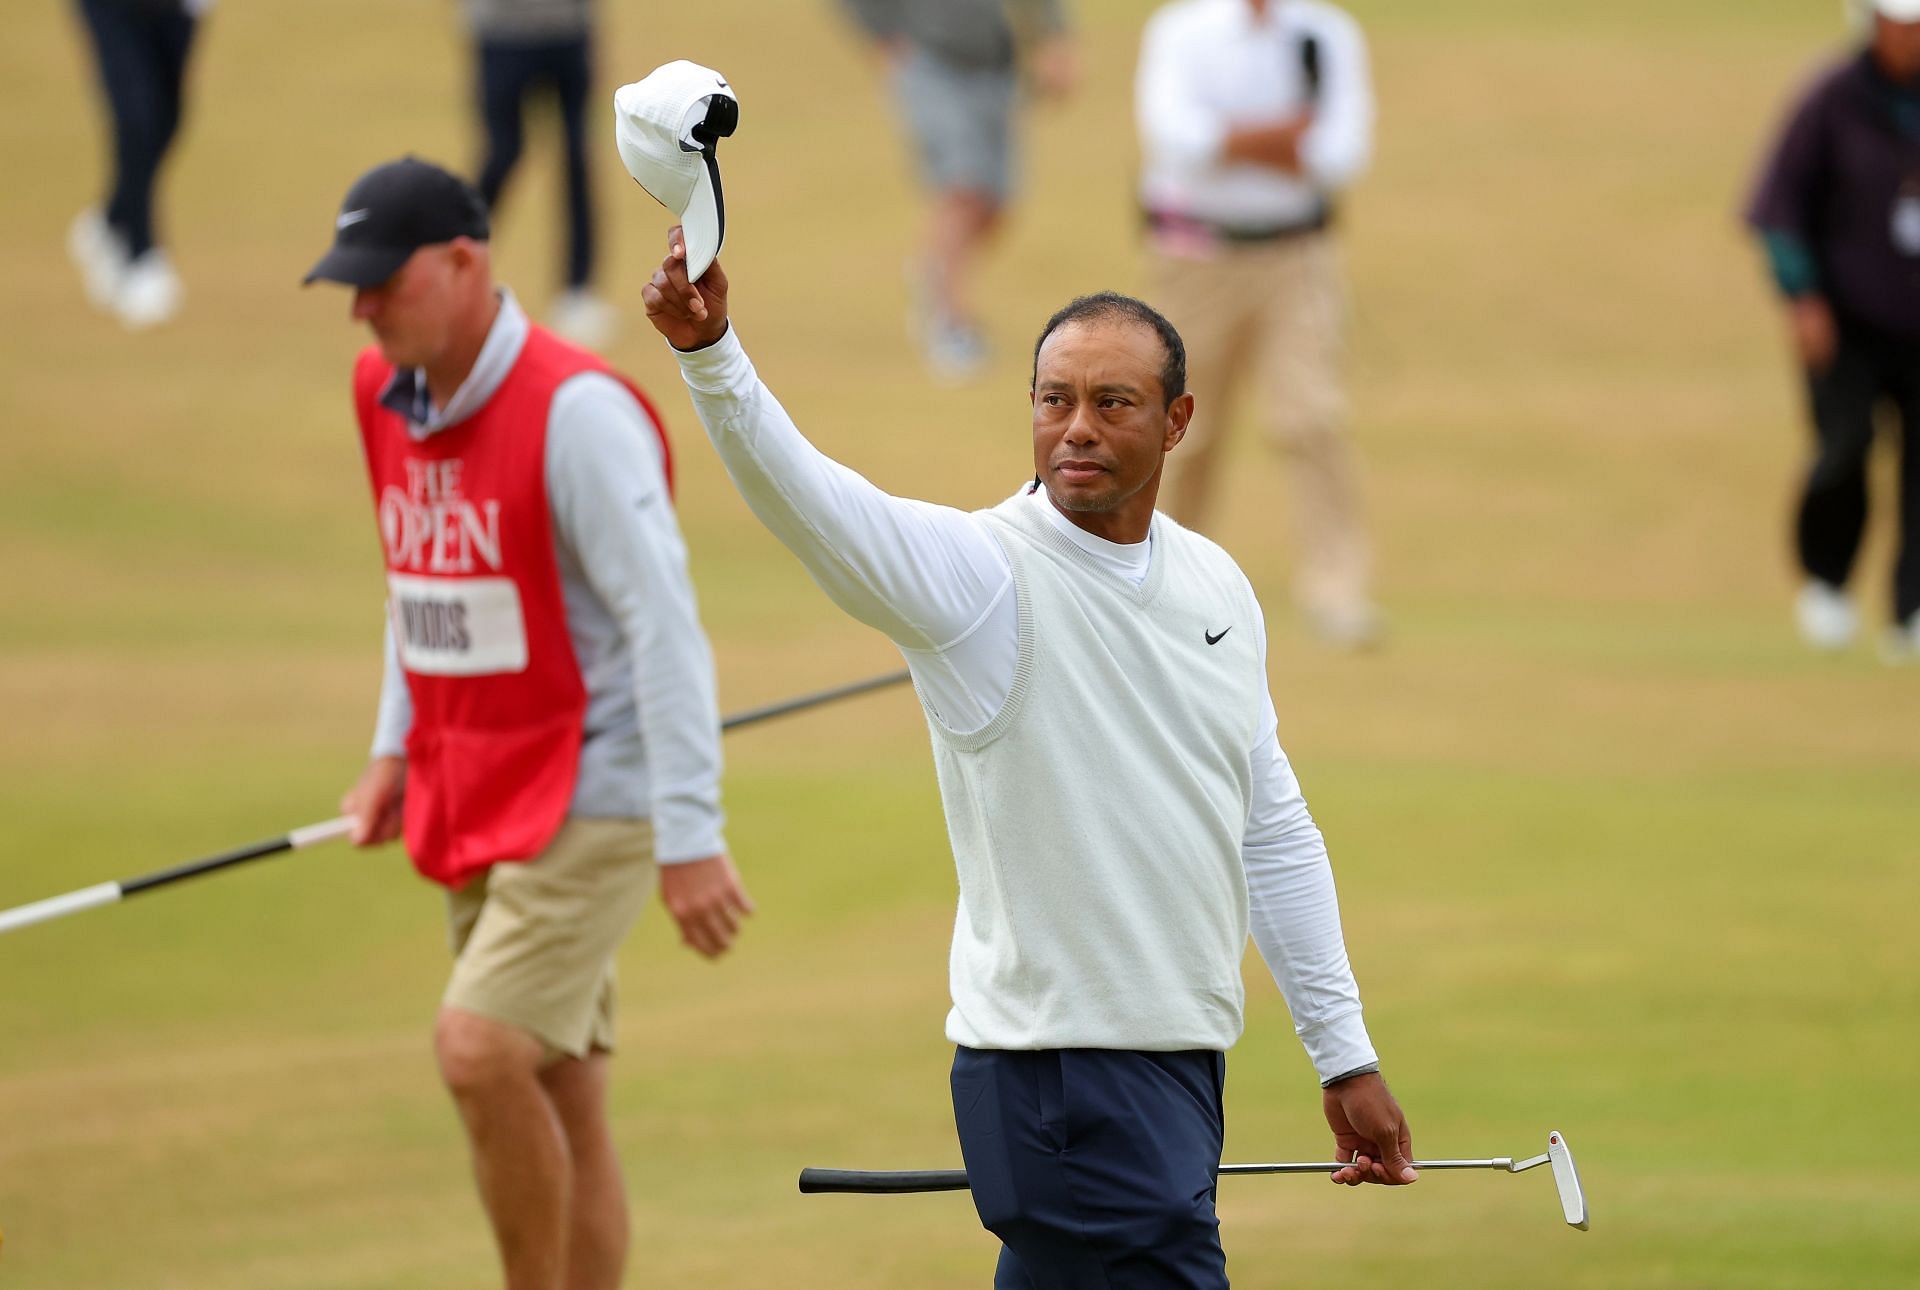 Tiger Woods in Day 2 of the 150th Open last week (Image via Getty)